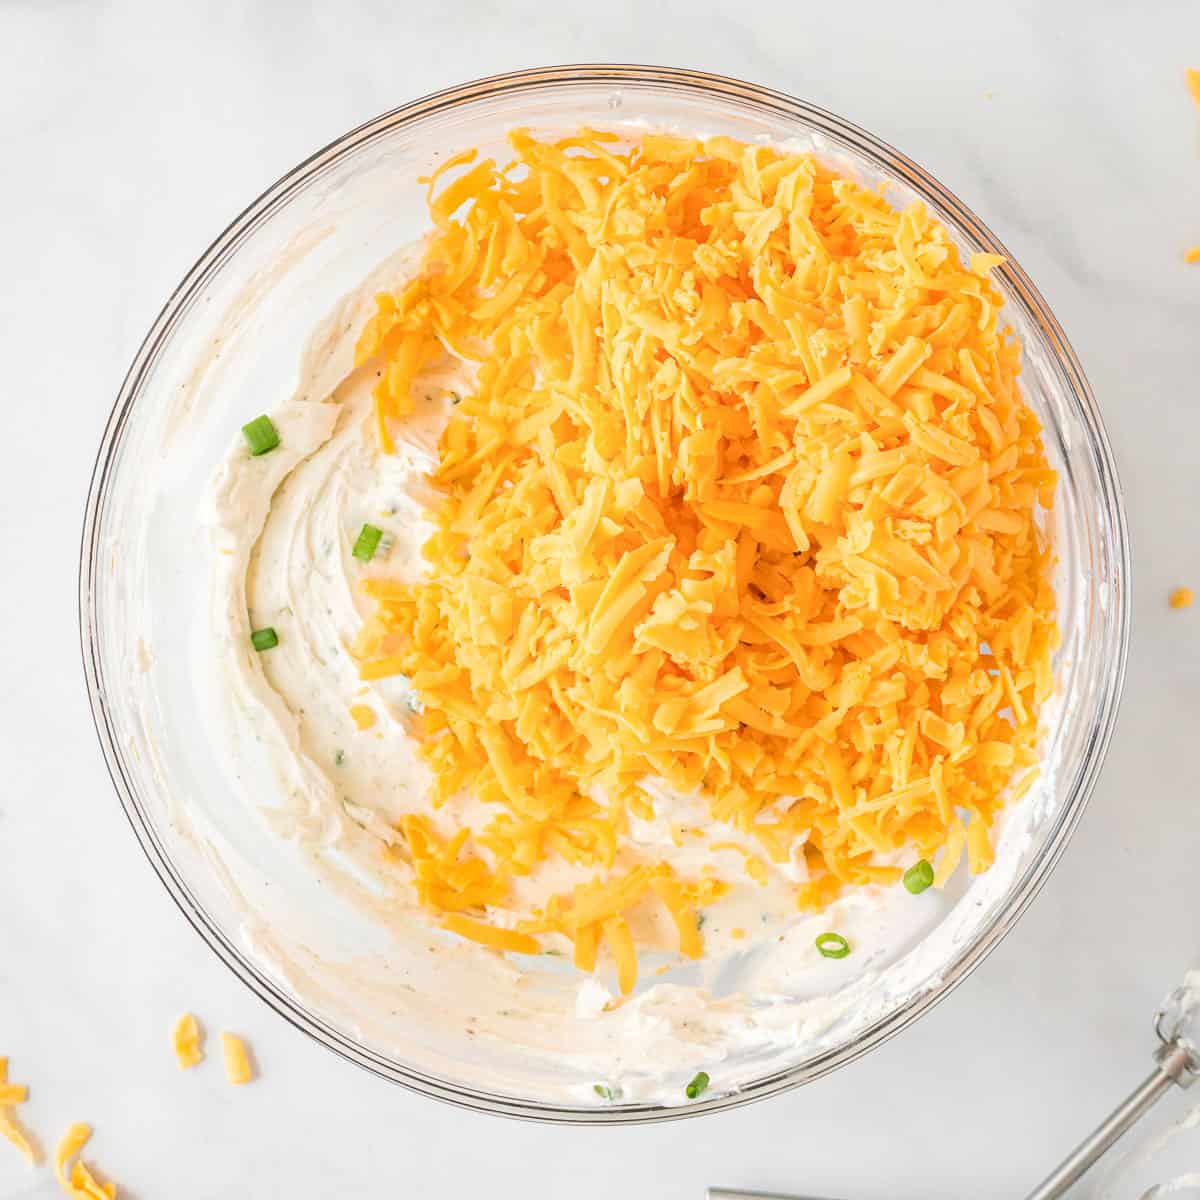 shredded cheddar added to the cheese ball ingredients